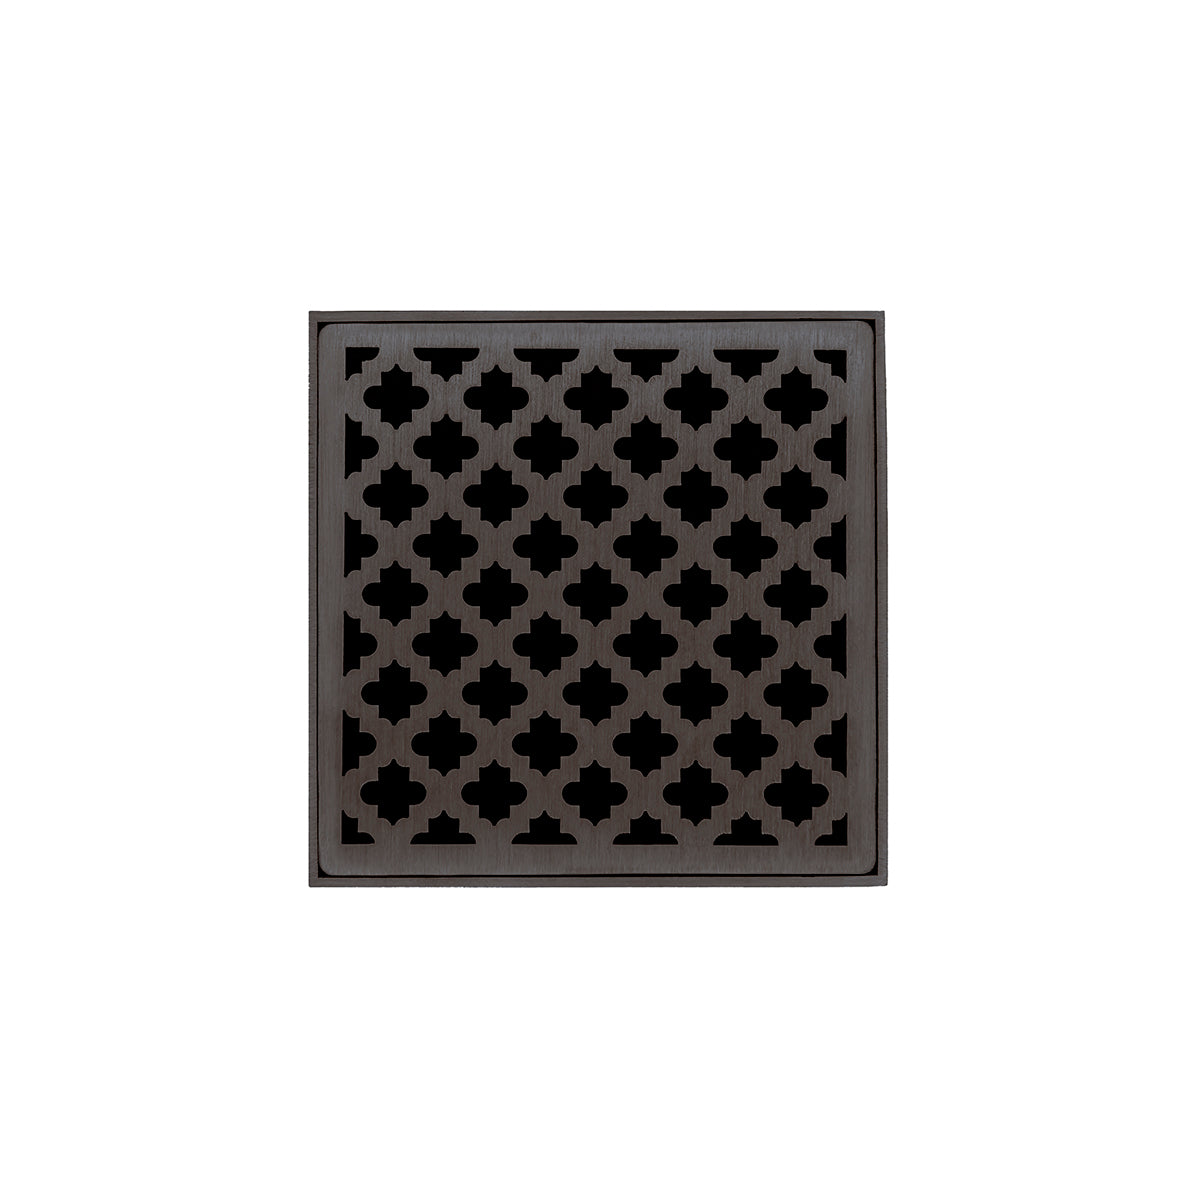 Infinity Drain 5" x 5" MD 5 High Flow Premium Center Drain Kit with Moor Pattern Decorative Plate with Cast Iron Drain Body, 3" No-Hub Outlet